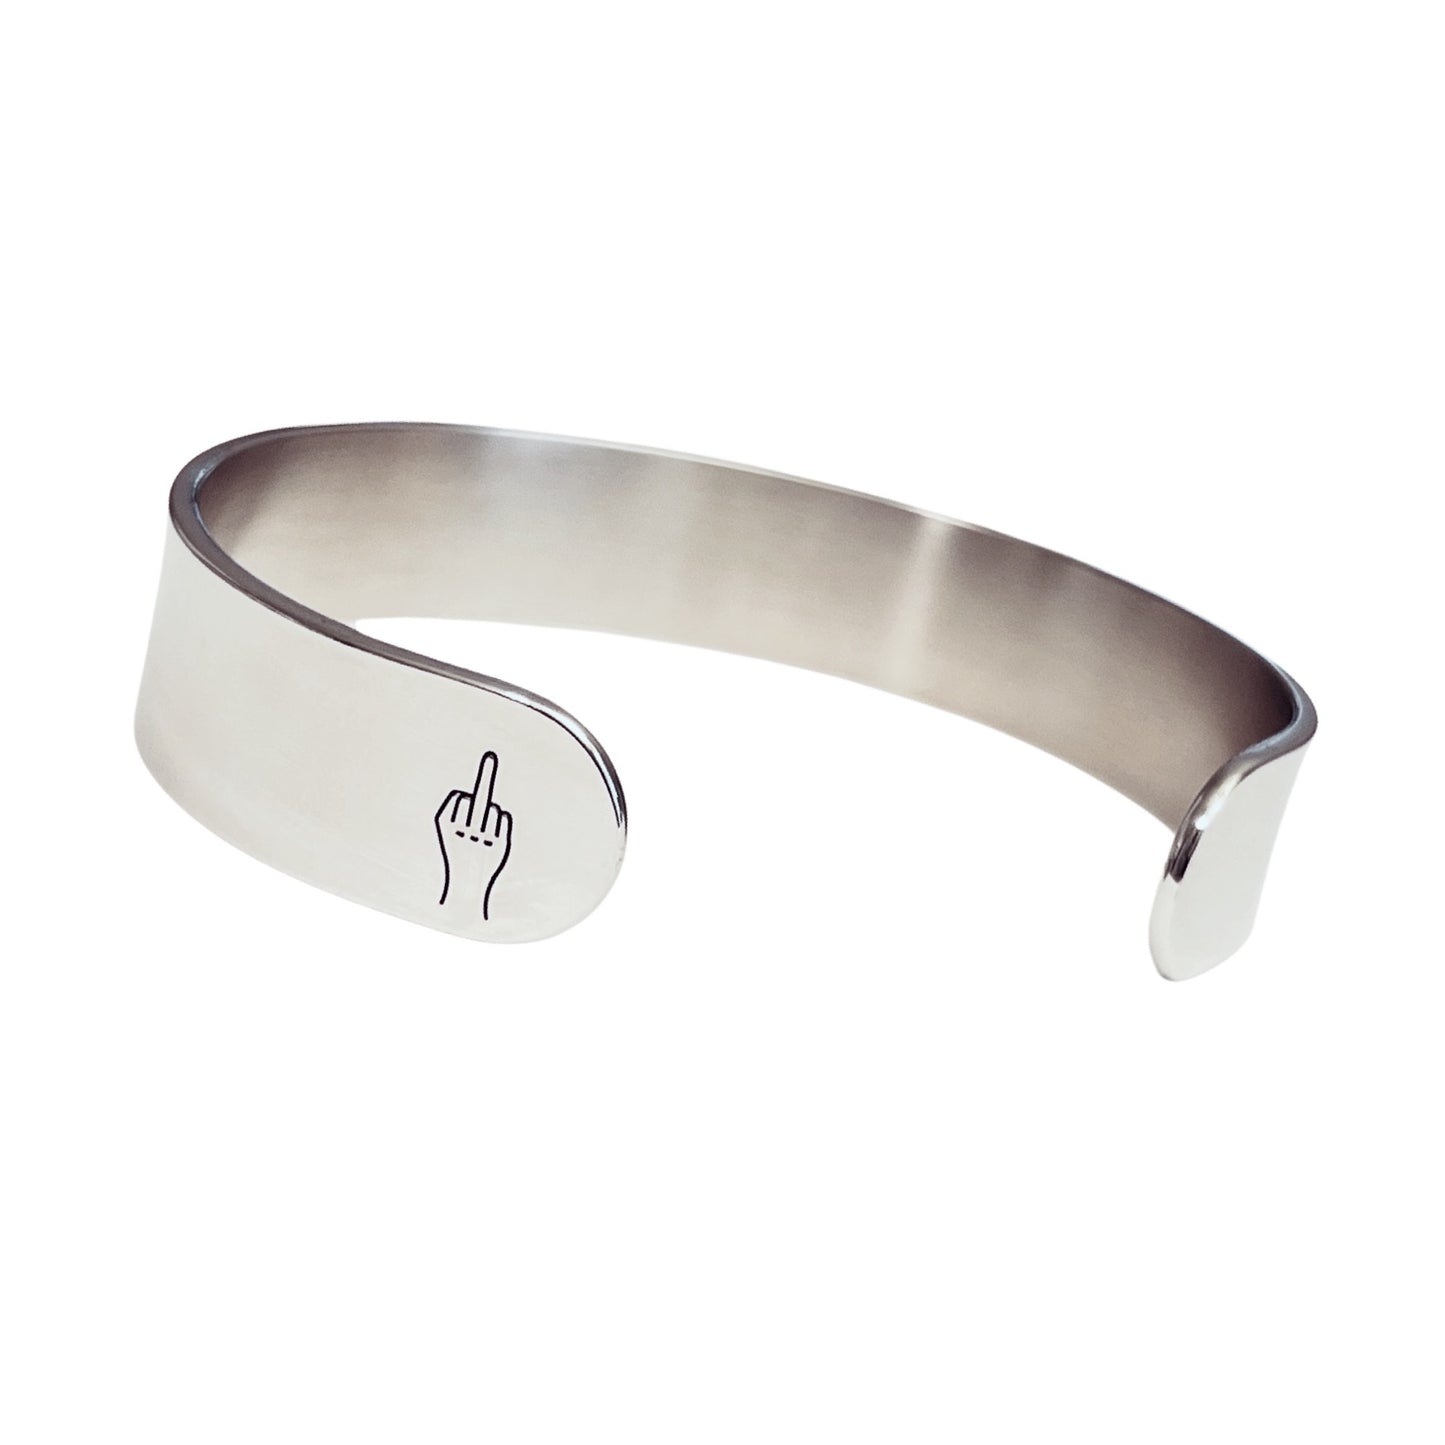 If I’m too much, go find less | Cuff Bracelet